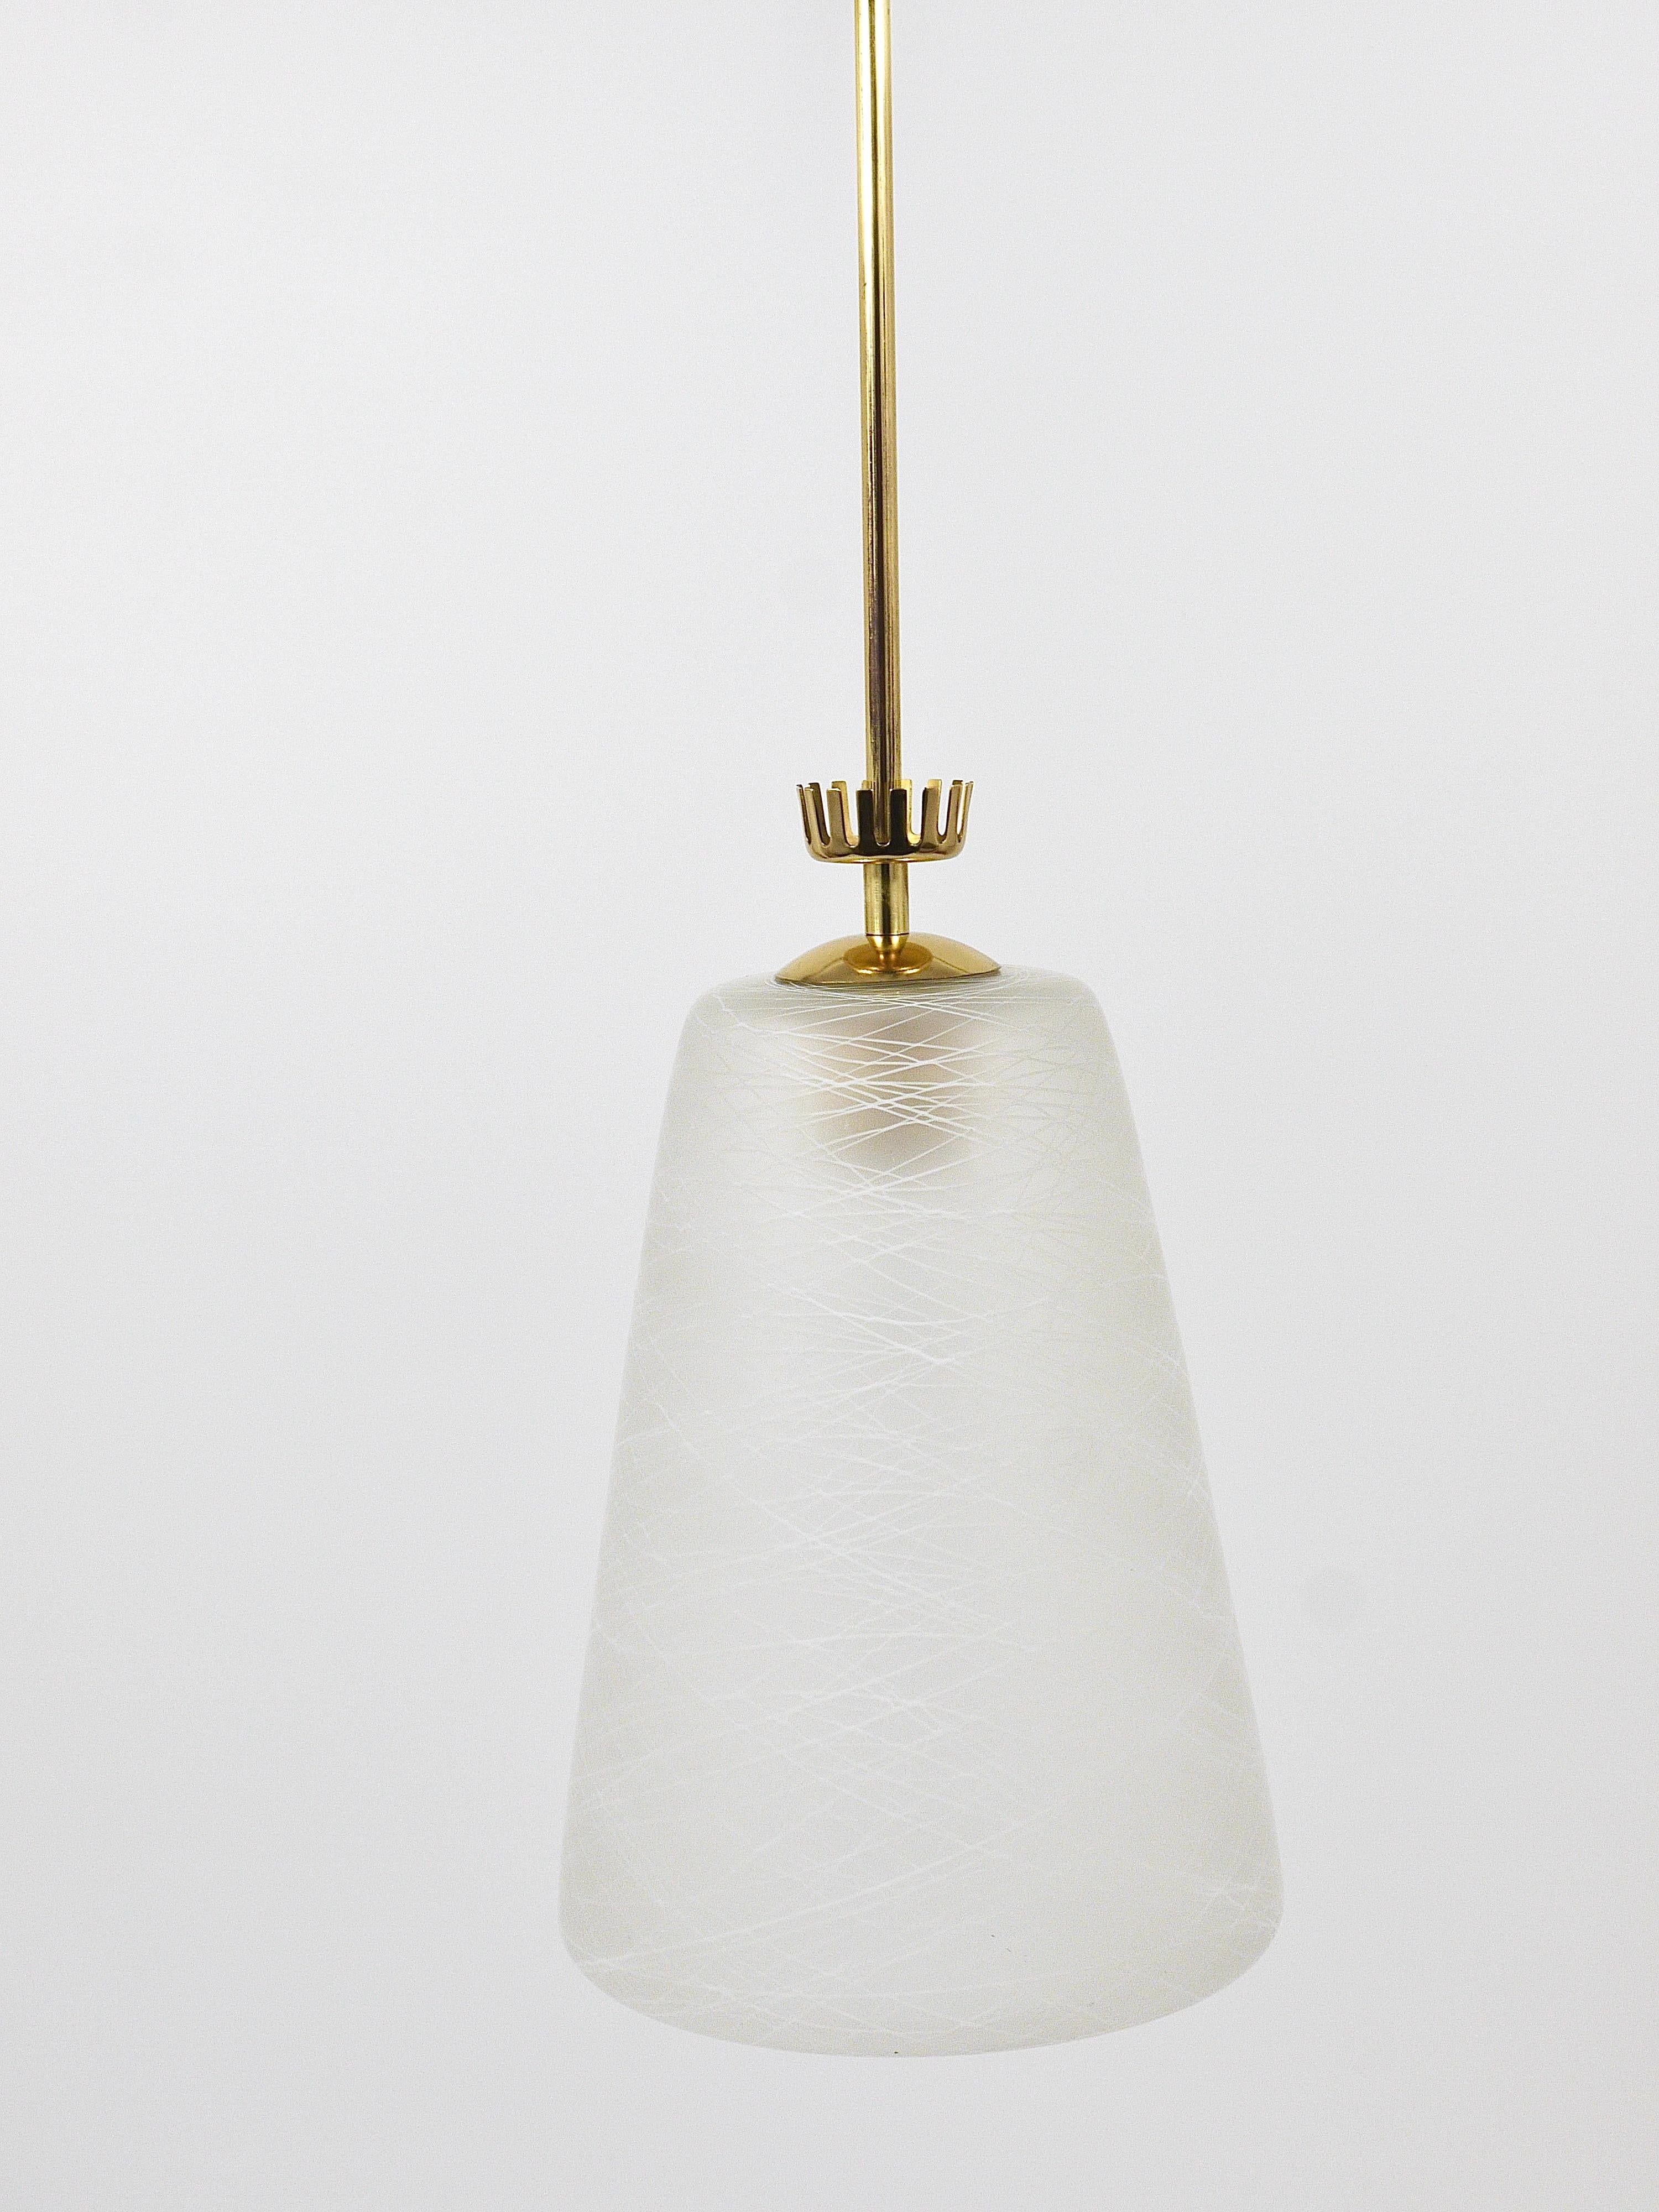 Etched Gio Ponti Style Mid-Century Brass Crown Pendant Lamp Lantern, Italy, 1950s For Sale